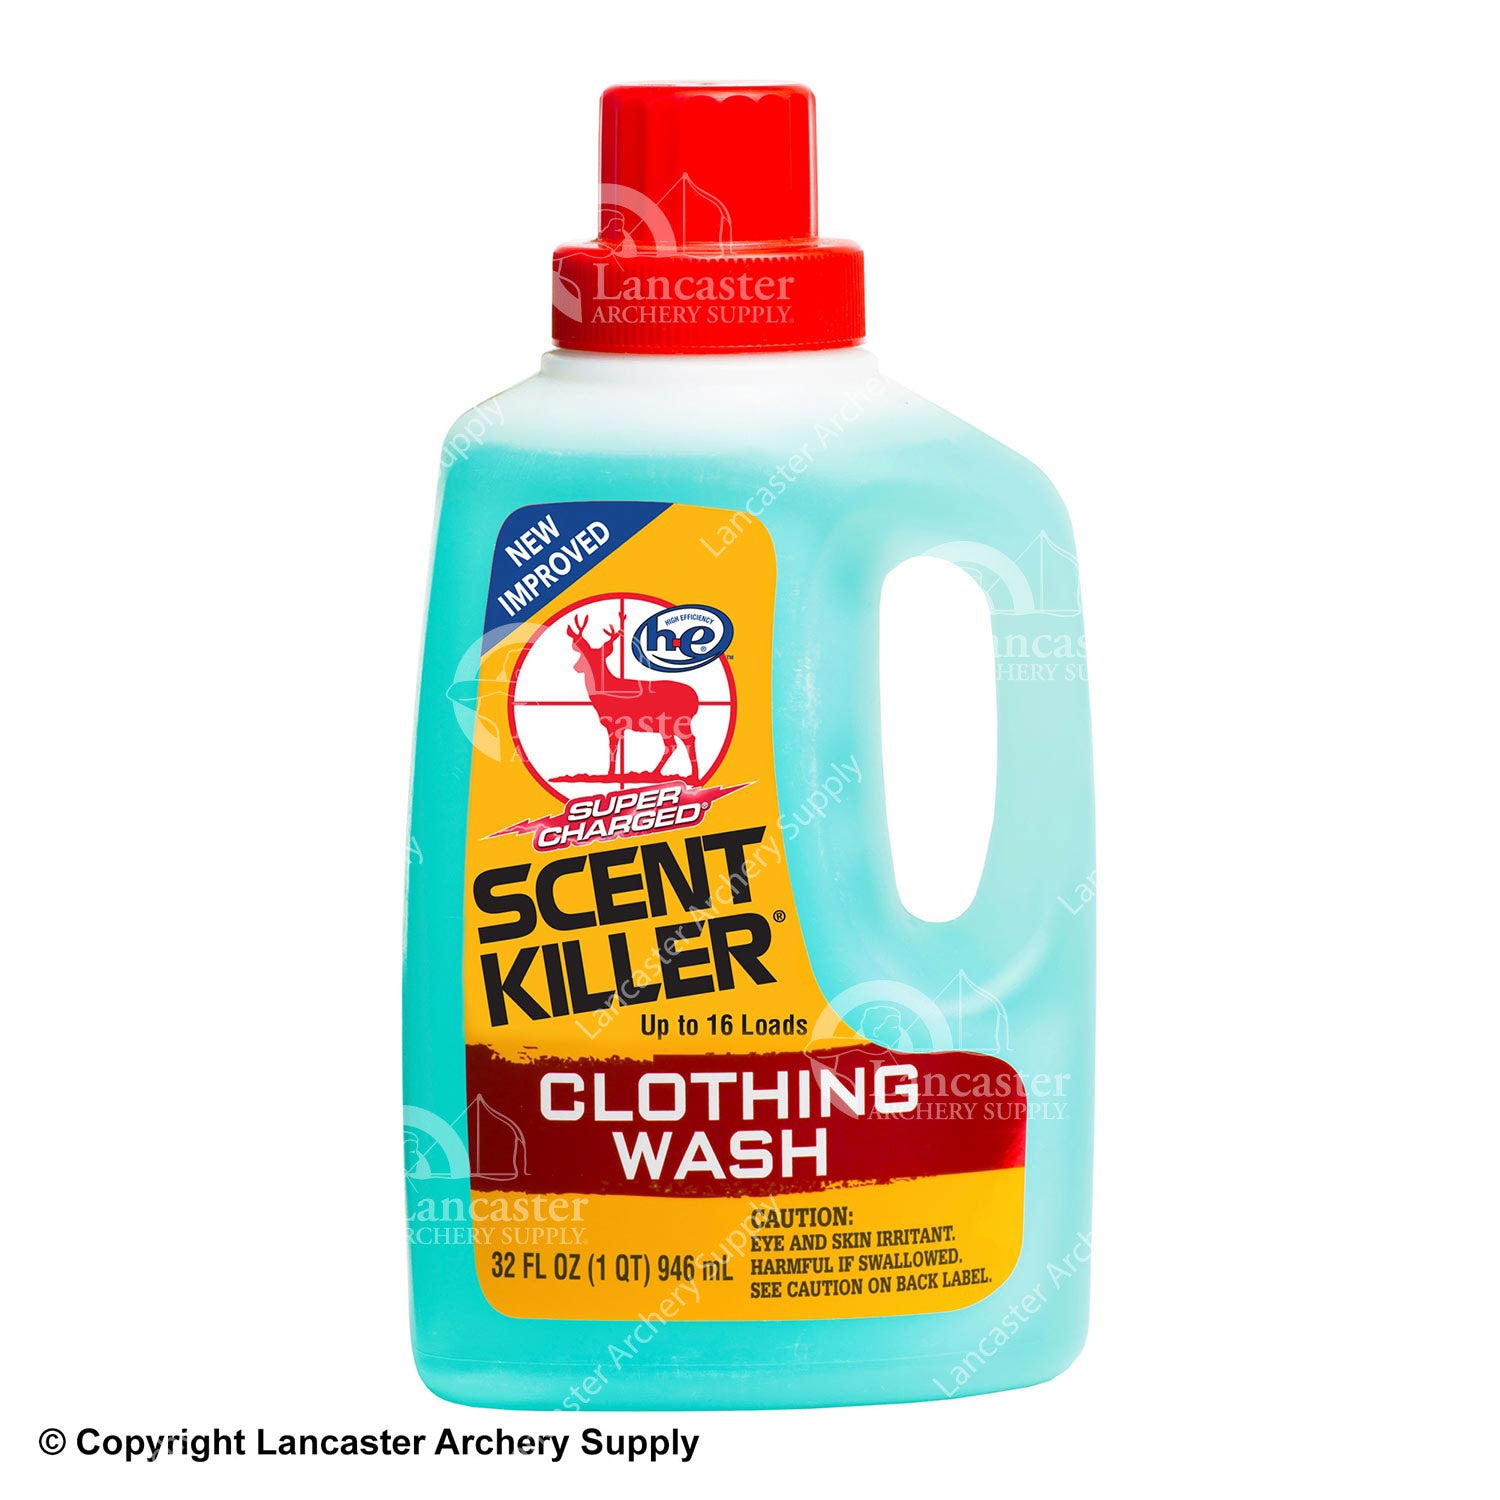 Wildlife Research Center Super Charged Scent Killer Clothing Wash